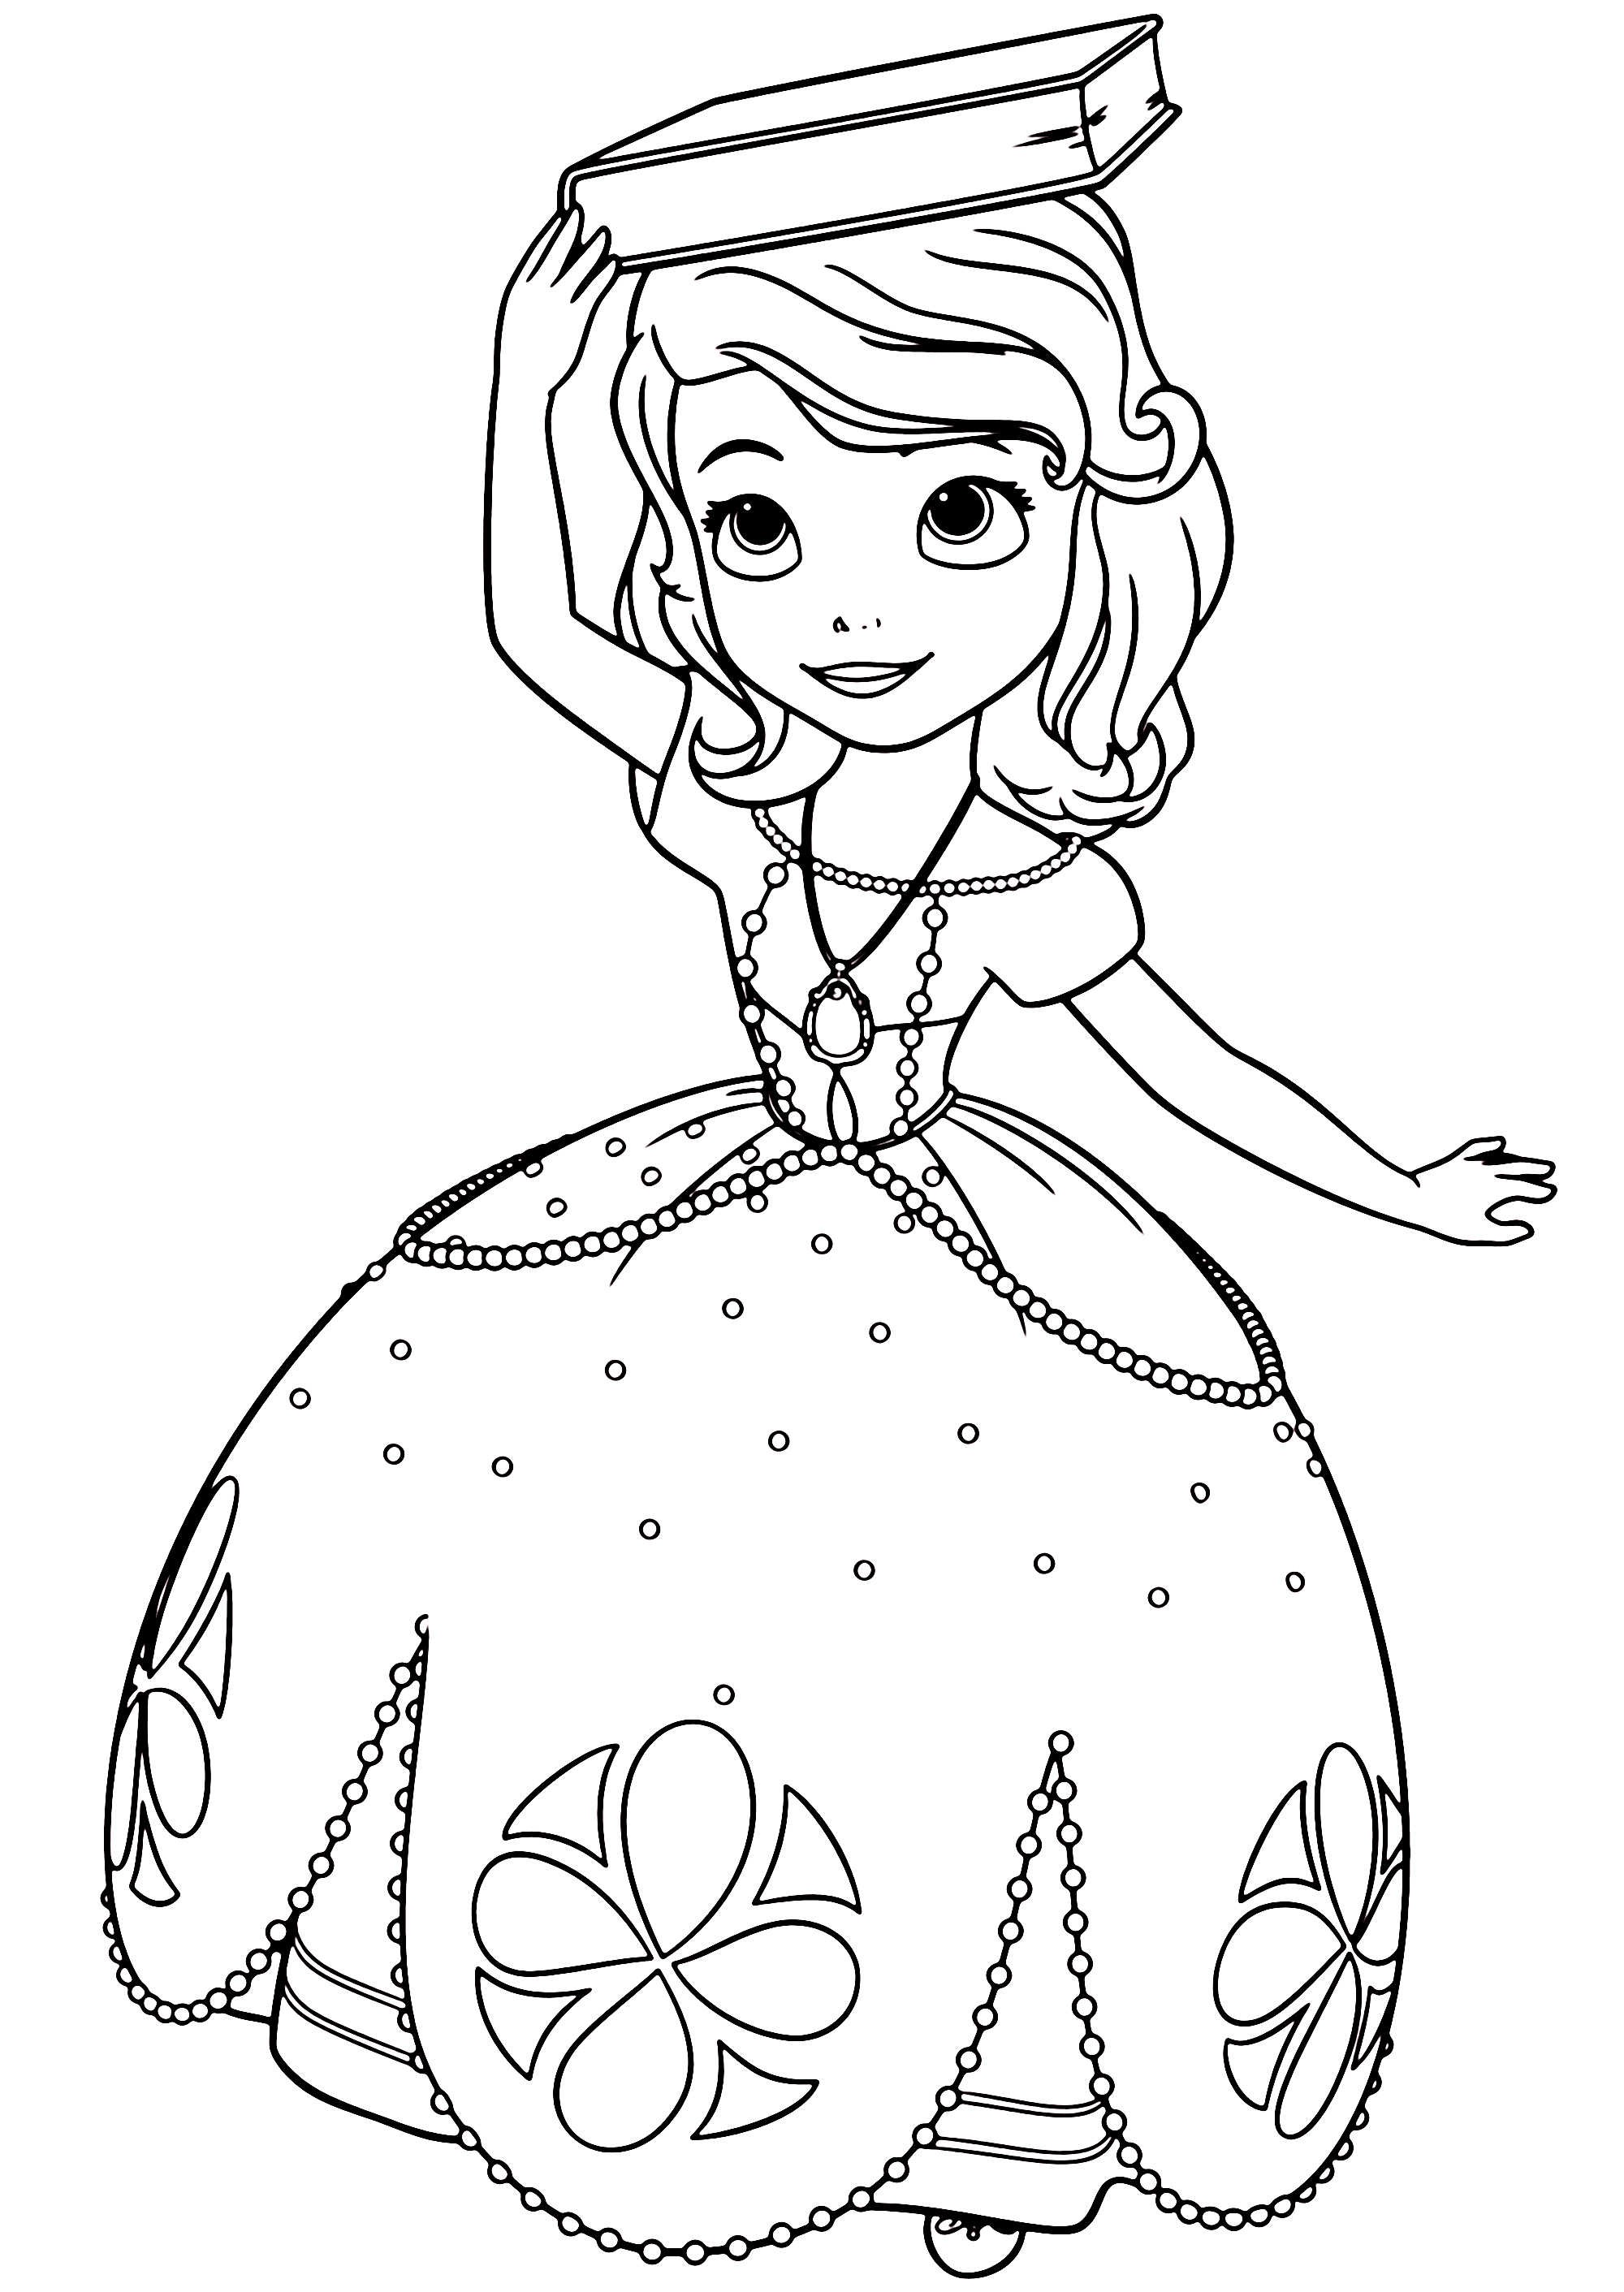 Funny Looking Sofia the First Cute and Lovely Princess Coloring Page for Girls